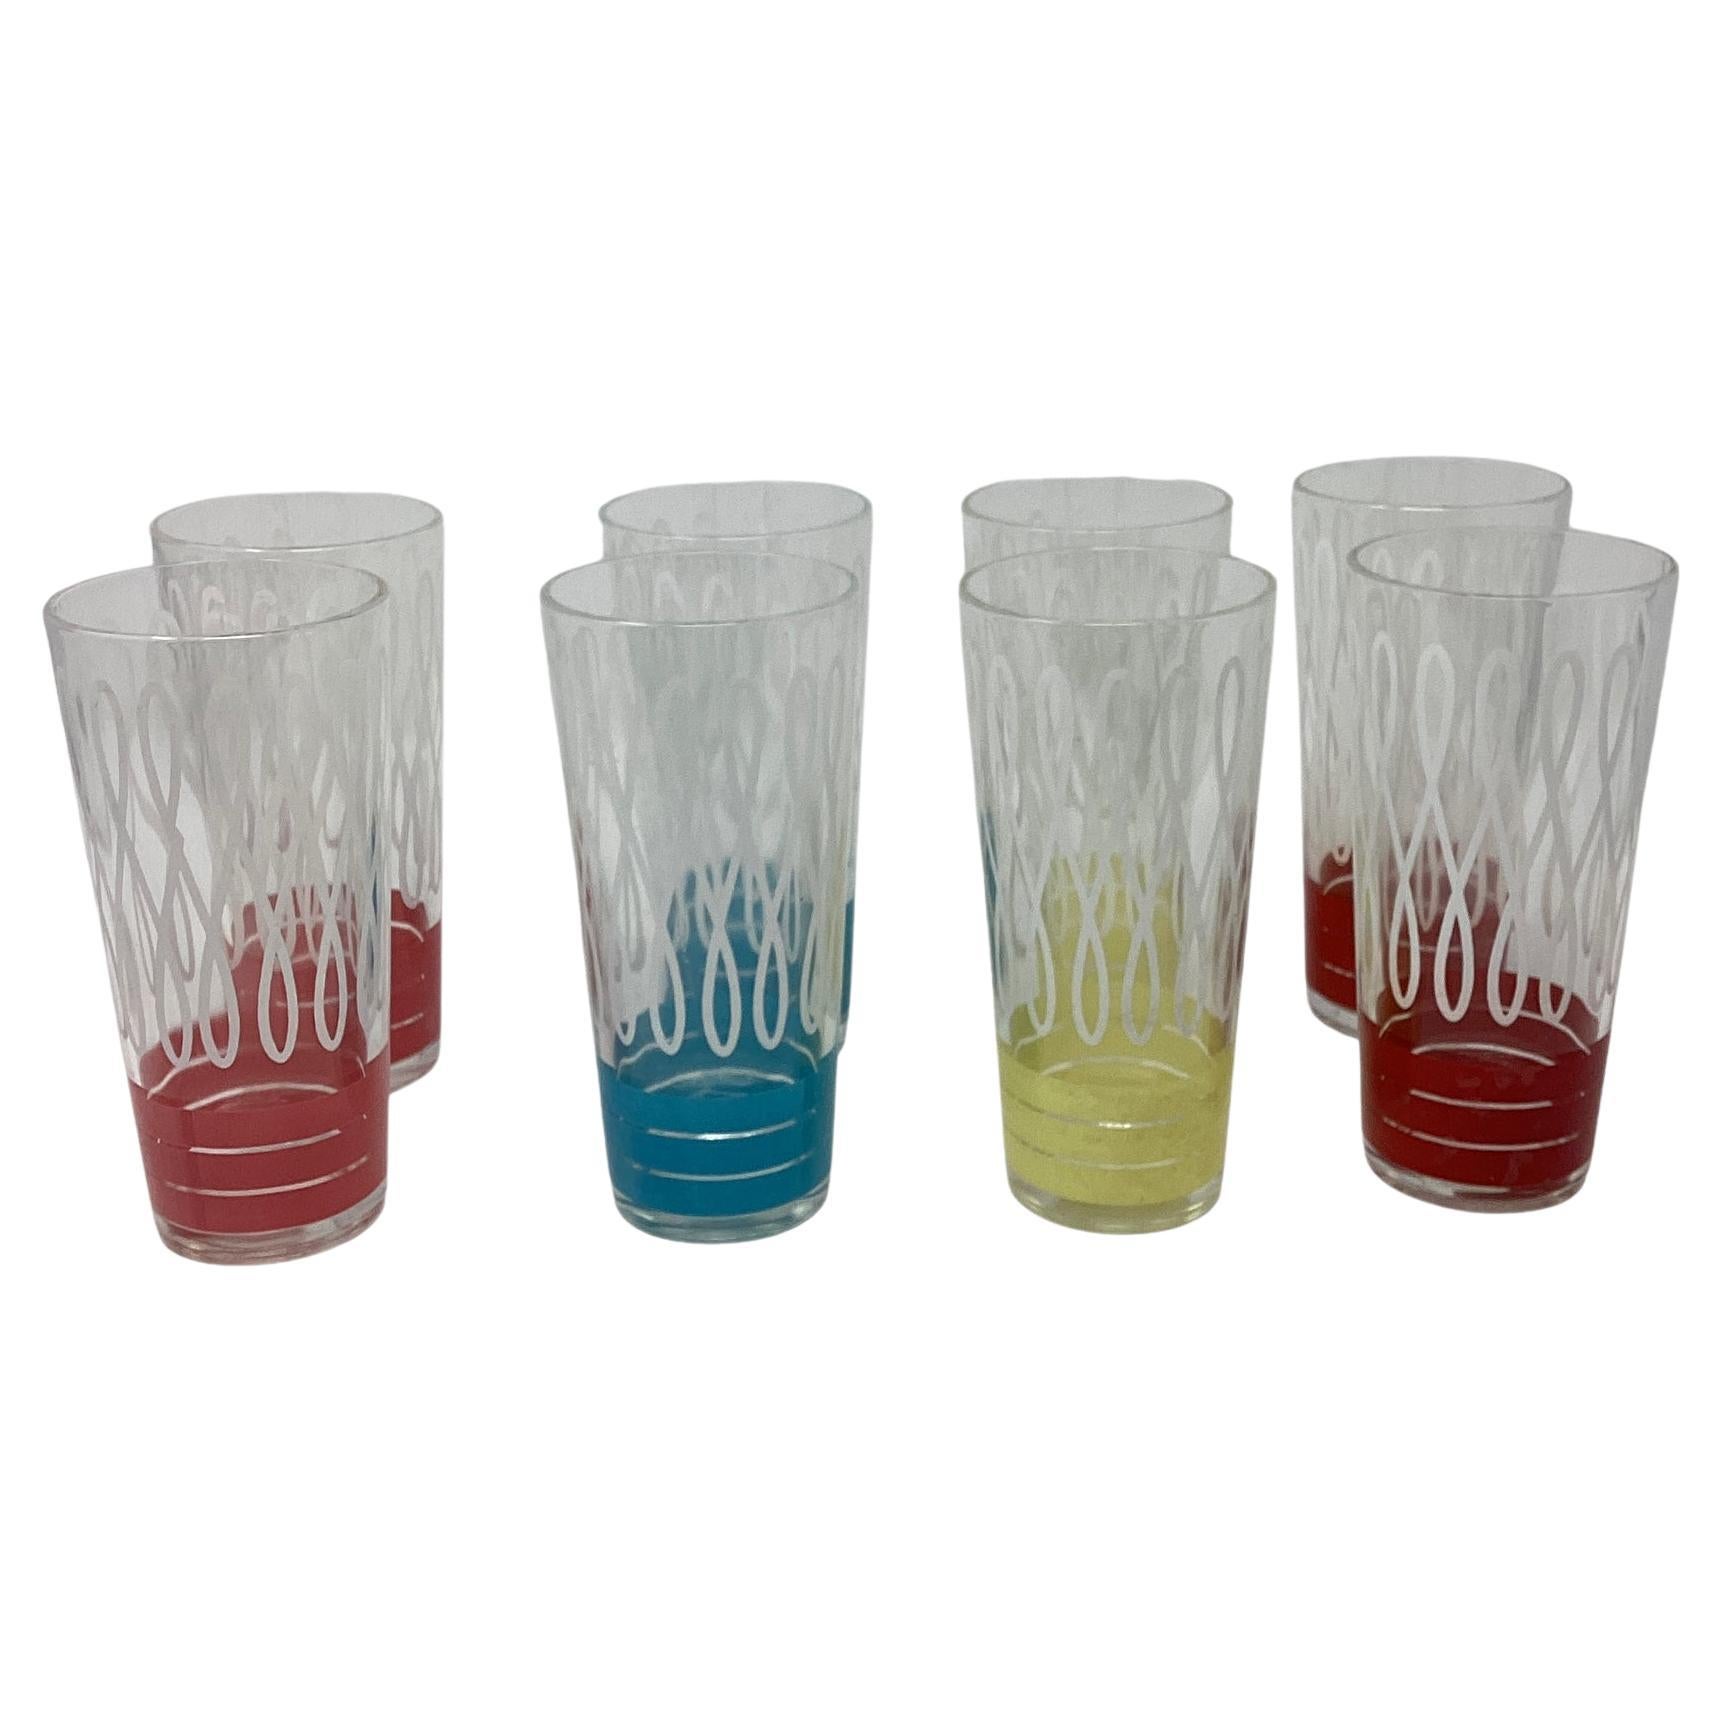 Set of 8 Vintage Tumblers with White Swirled Design and Colored Bands  For Sale